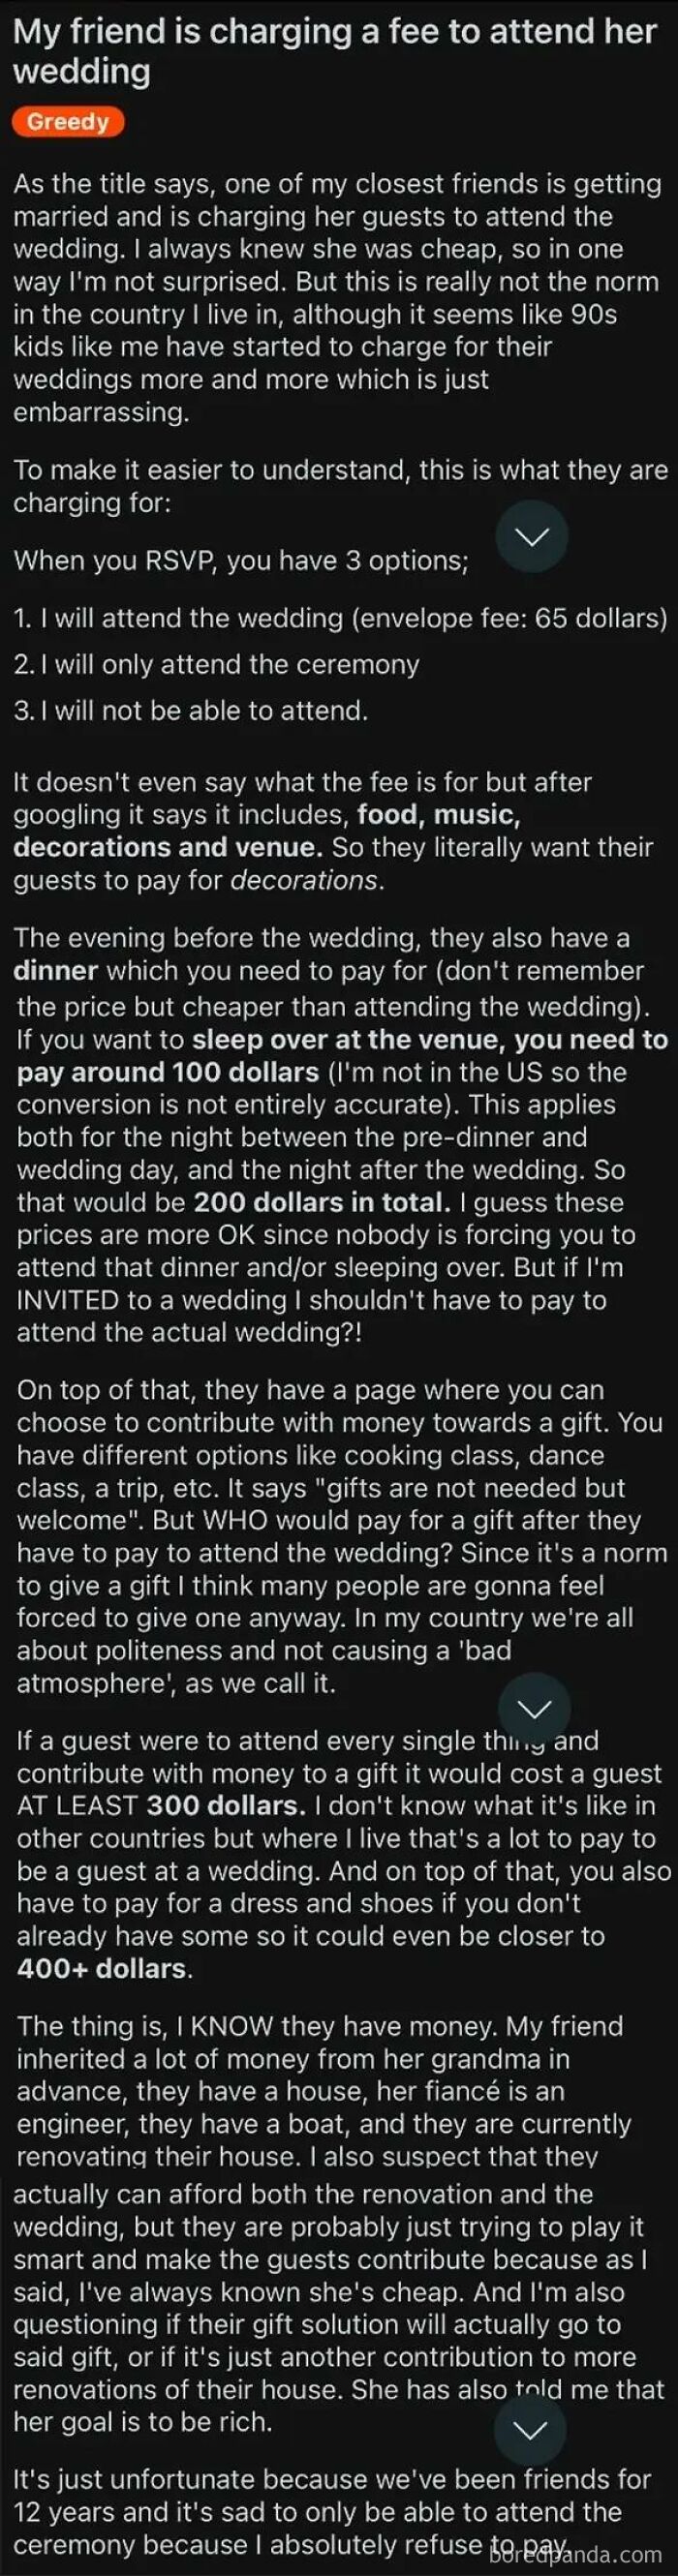 My Friend Is Charging A Fee To Attend Her Wedding